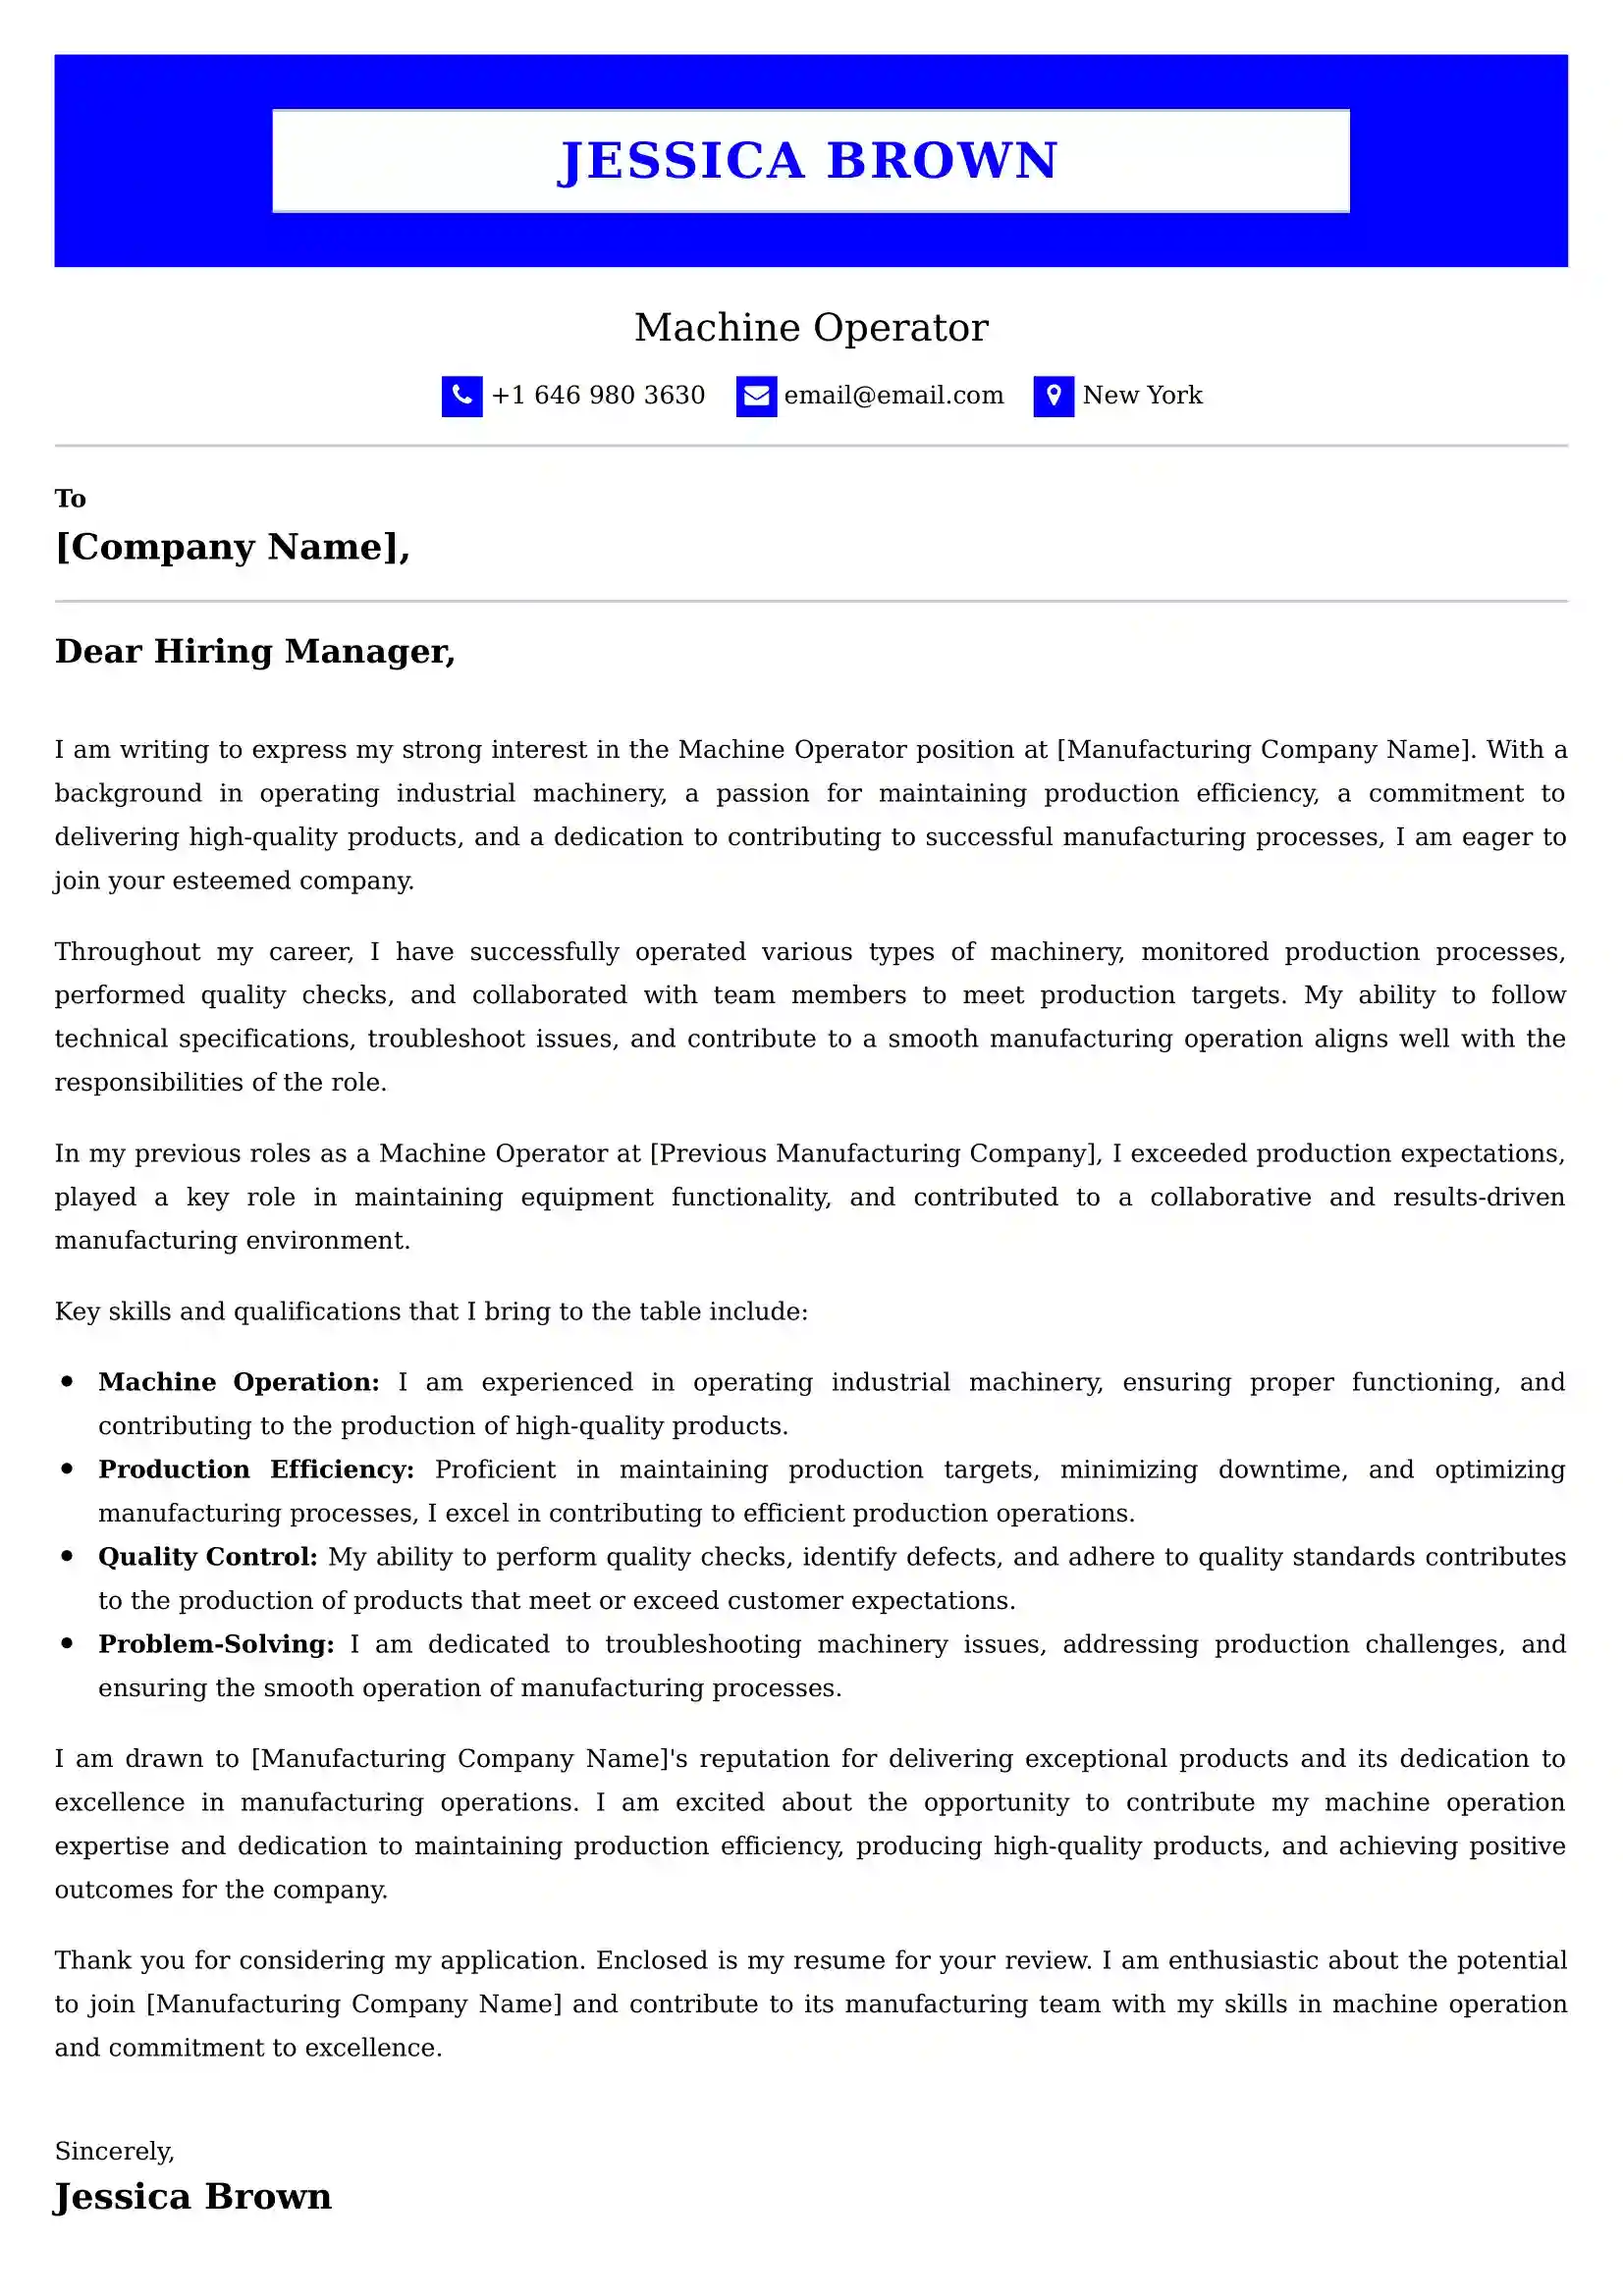 Machine Operator Cover Letter Examples -Latest Brazilian Templates